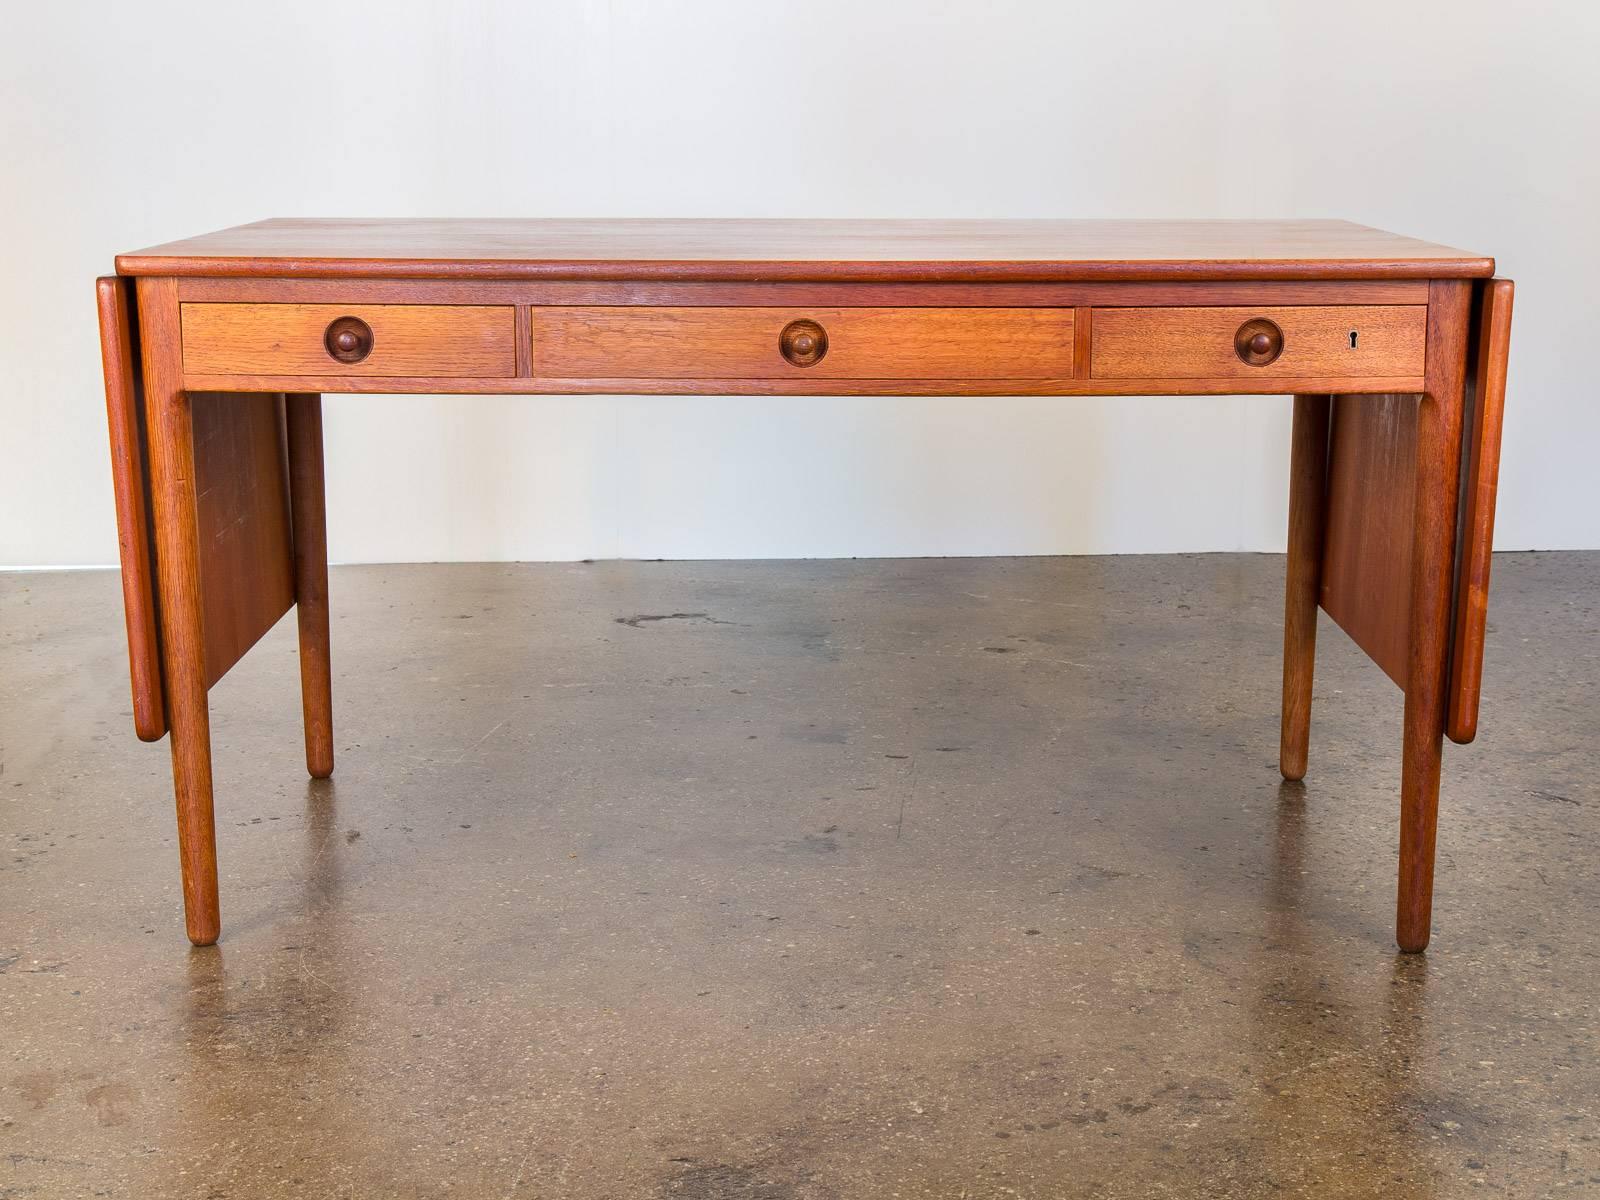 Scarce Danish oak and teak AT305 pencil desk by Hans Wegner for Andreas Tuck. Desk has a lovely age-appropriate patina with three long pull-out drawers. With the option of having the drop leaf open on one side, closed, or fully extended, it is a